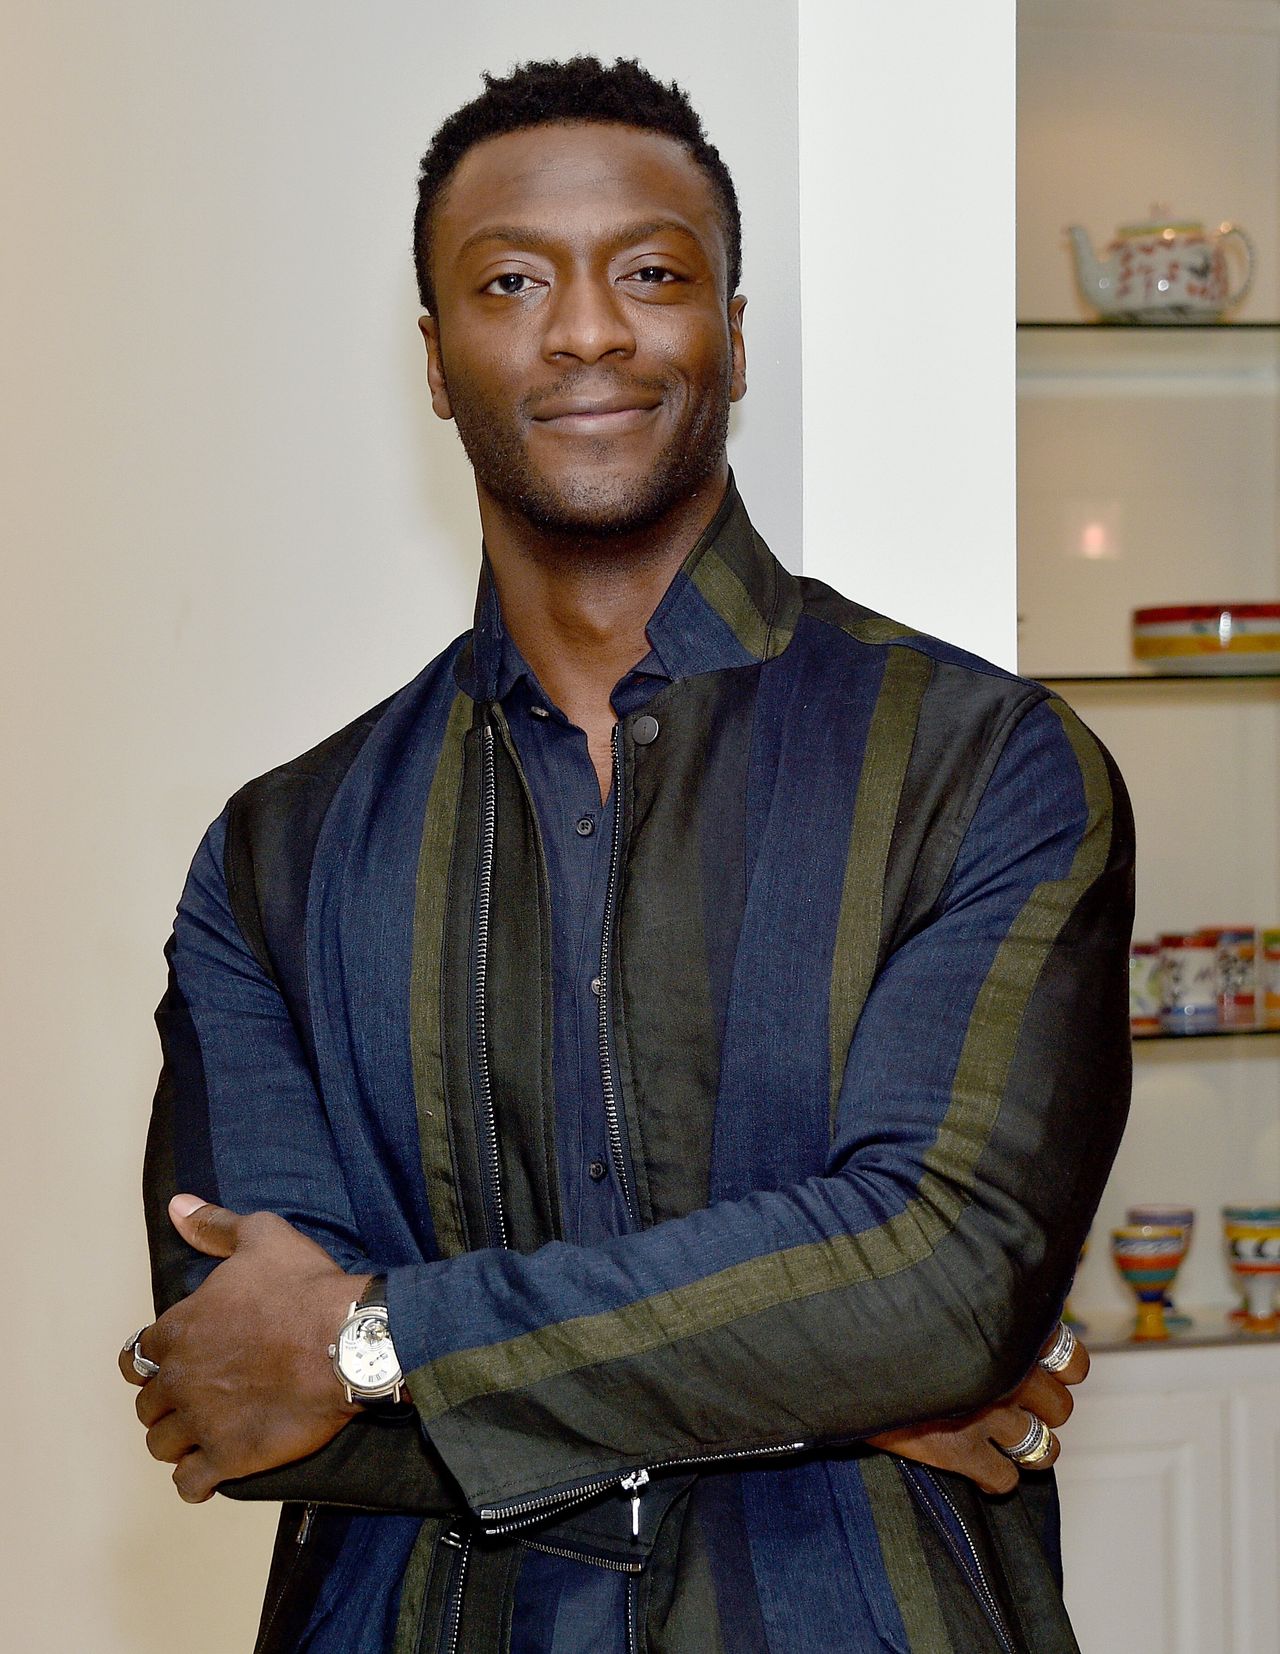 Aldis Hodge unifies his projects - watch-making and acting - under one umbrella as 'art'